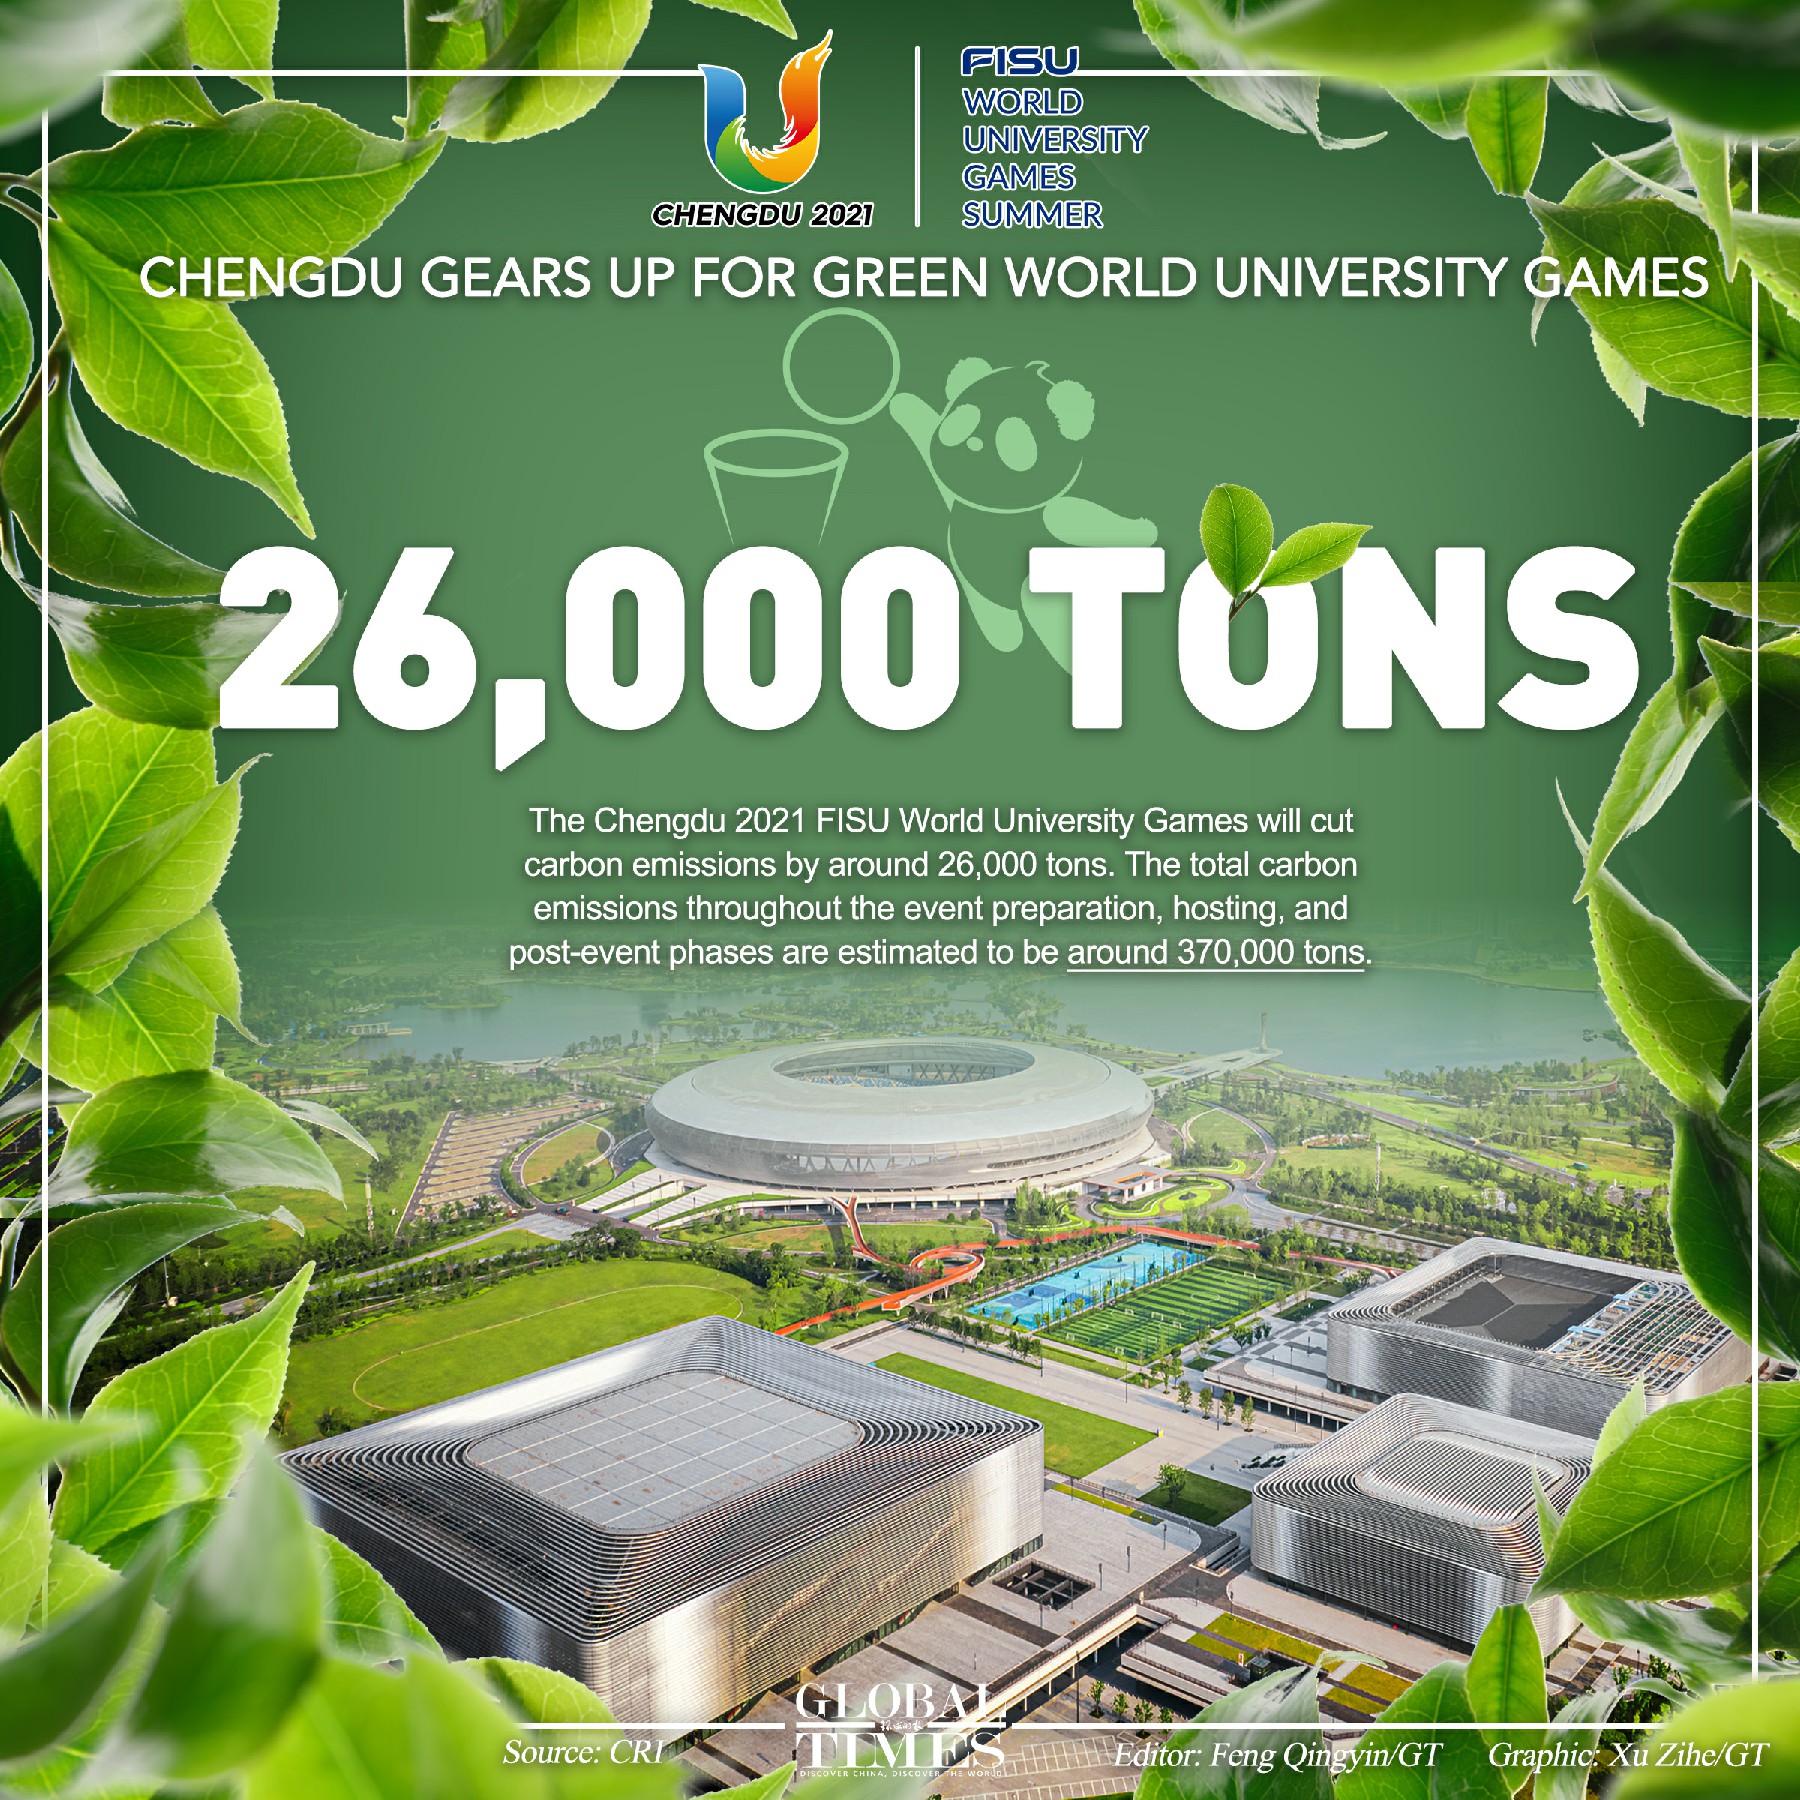 The World University Games is expected to commence in Chengdu, Southwest China's Sichuan Province, on July 28, 2023. The Games embrace the green and low-carbon concept, which will cut carbon emissions by around 26,000 tons. Editor: Feng Qingyin/GT Graphic: Xu Zihe/GT